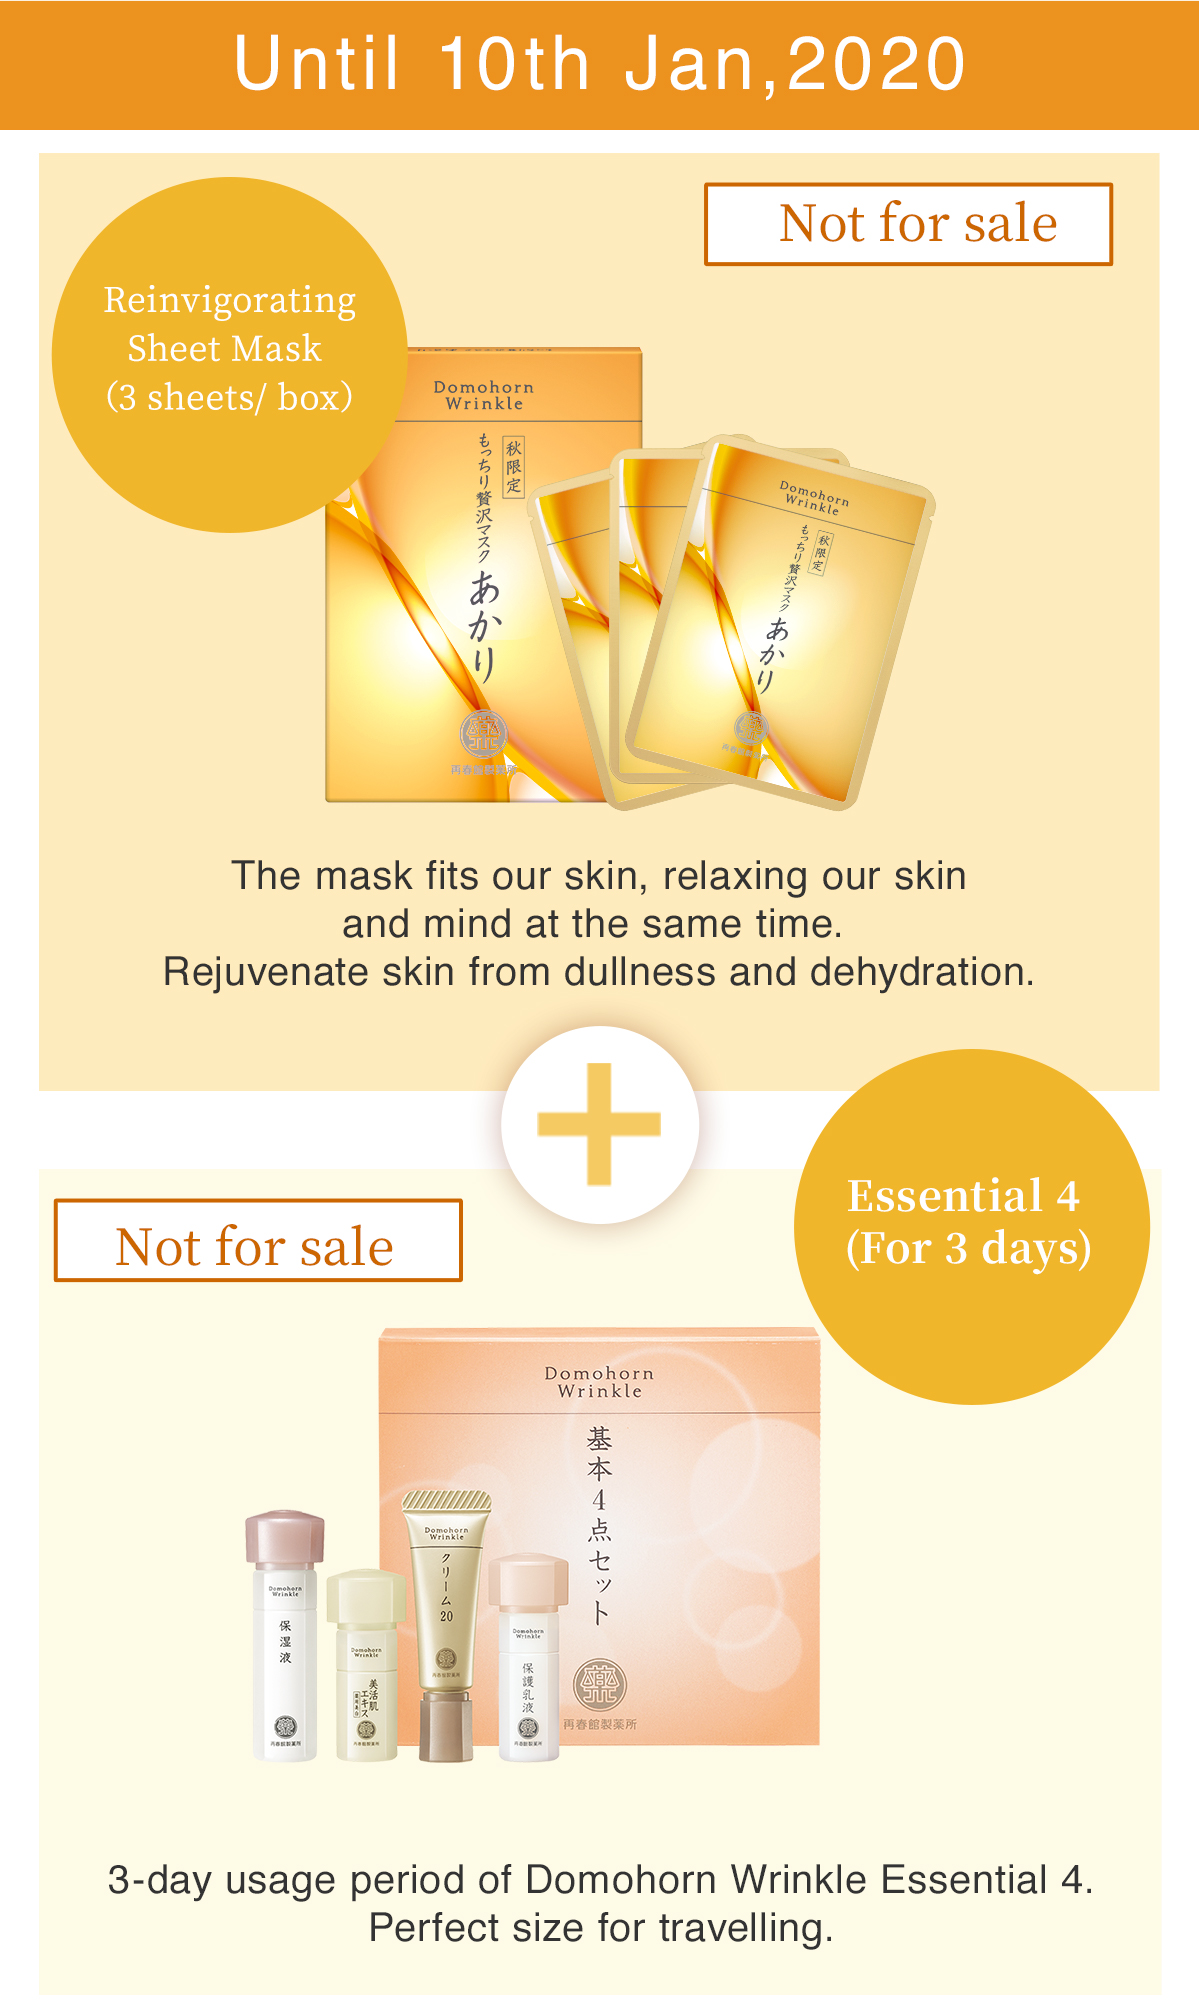 Until 10th Jan,2020 Reinvigorating Sheet Mask （3 sheets/ box）The mask fits our skin, relaxing our skin and mind at the same time. Rejuvenate skin from dullness and dehydration. Essential 4 (For 3 days) 3-day usage period of Domohorn Wrinkle Essential 4. Perfect size for travelling. Not for sale